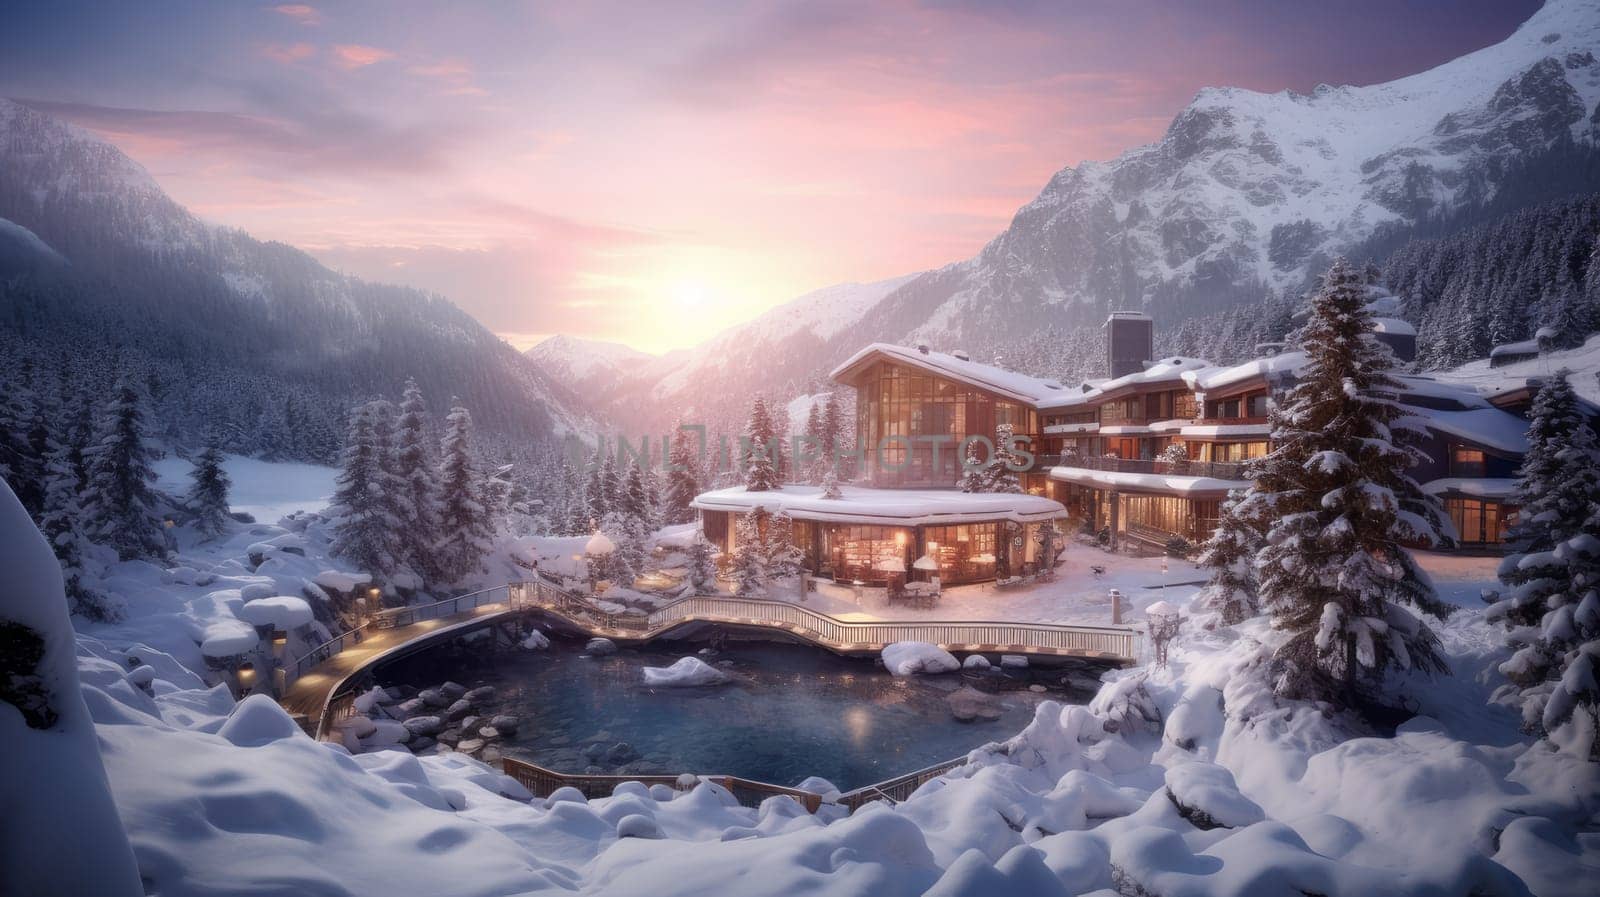 Picturesque, beautiful winter landscape of mountains and forest, snow-covered valley with a large hotel in privacy. Concept of traveling around the world, recreation, winter sports, vacations, tourism in the mountains and unusual places.